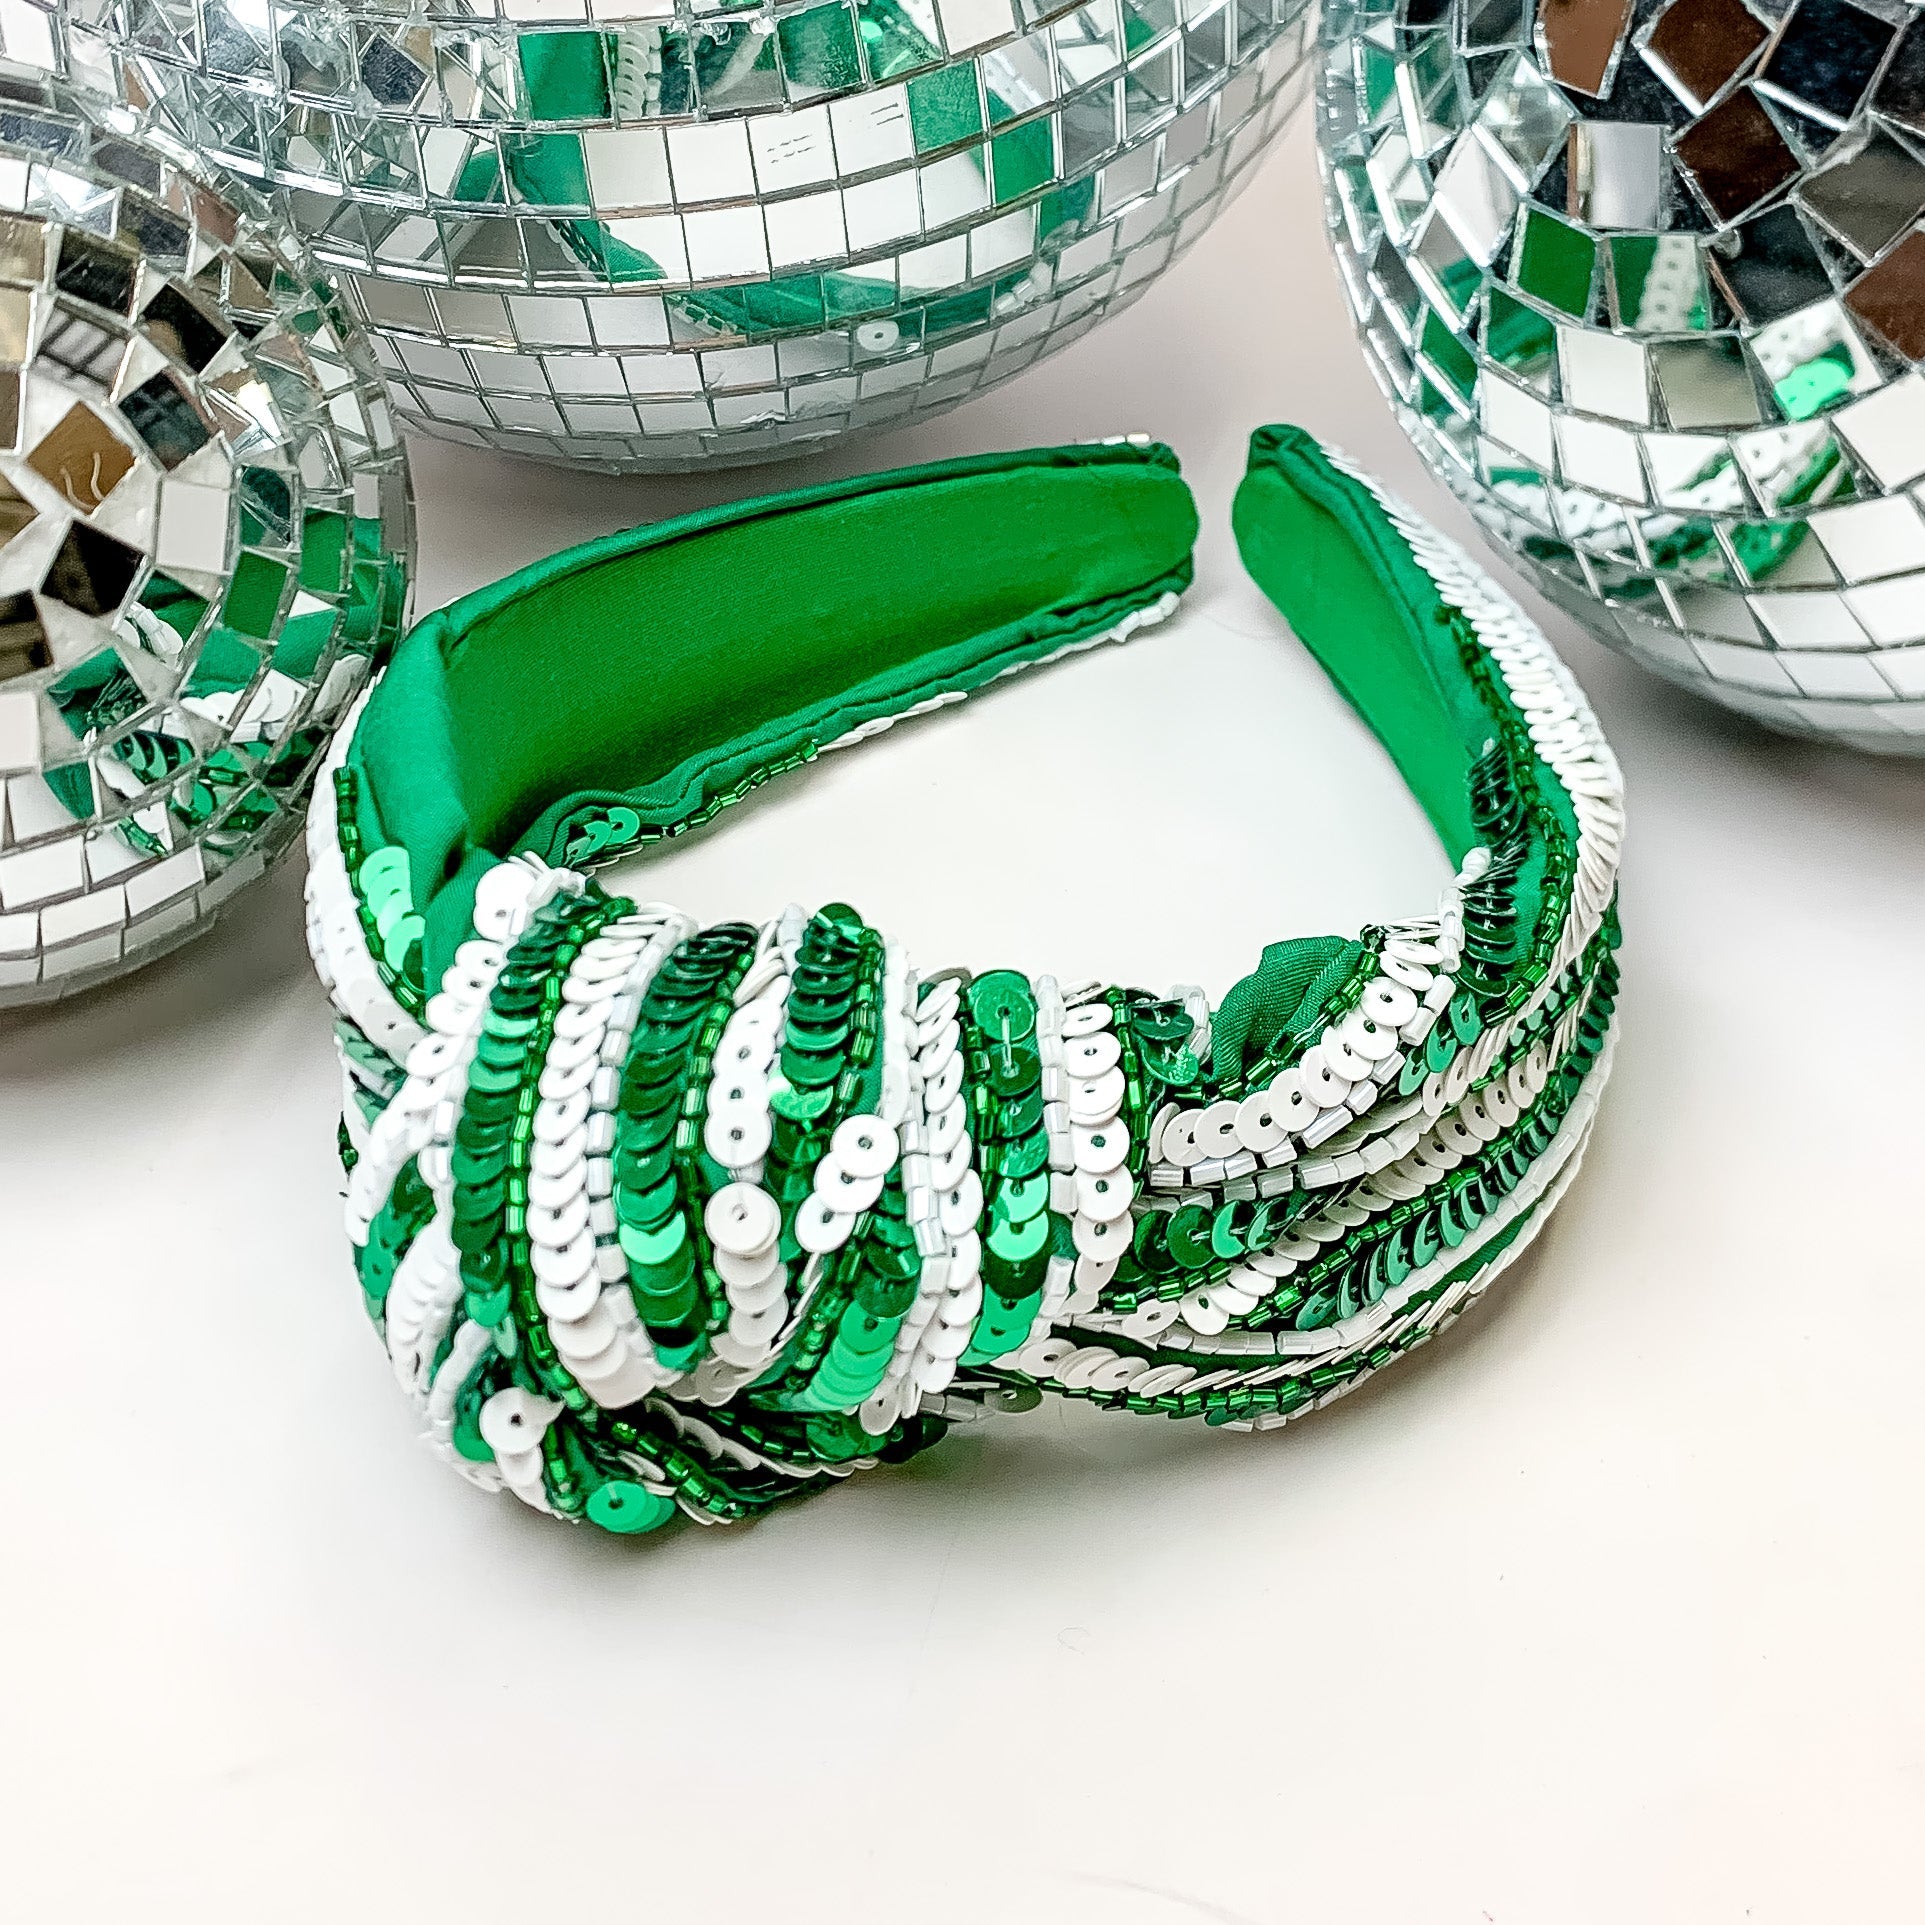 Striped Sequin Large Knot Headband in Green and White. This headband is pictured on a white background with disco balls behind the headband.